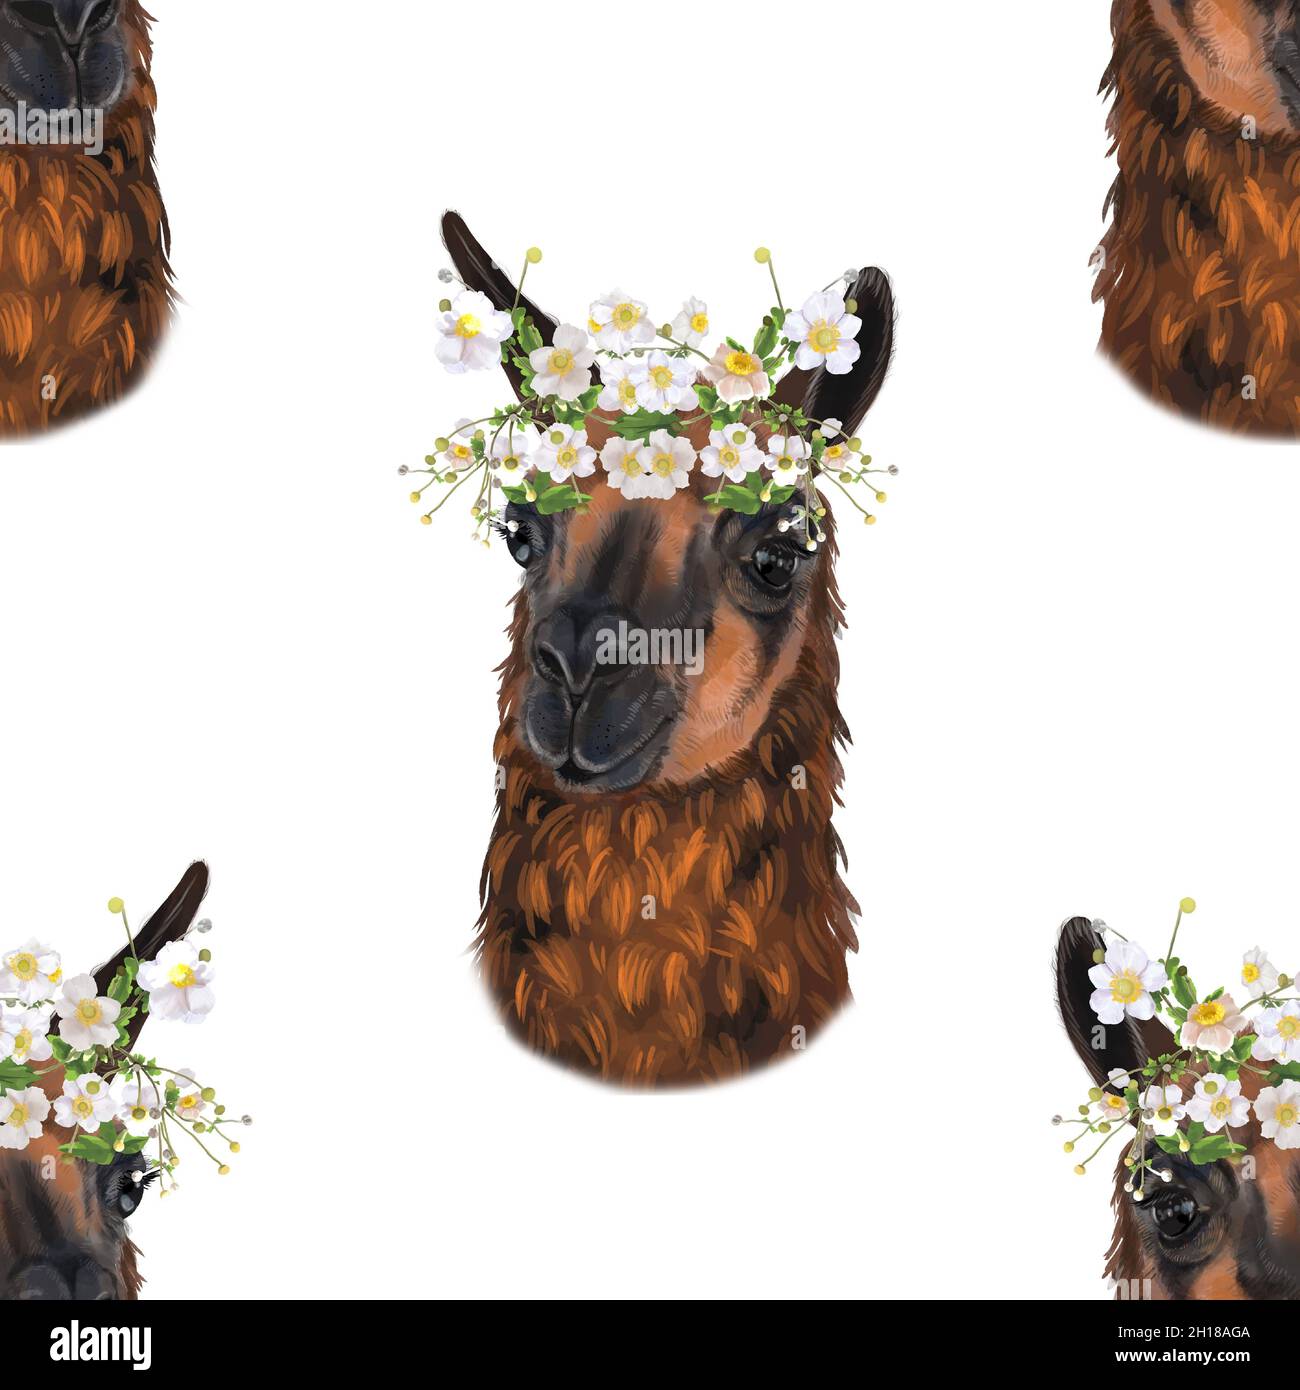 Watercolor seamless pattern of Lama and Alpaca in flowers Stock Photo